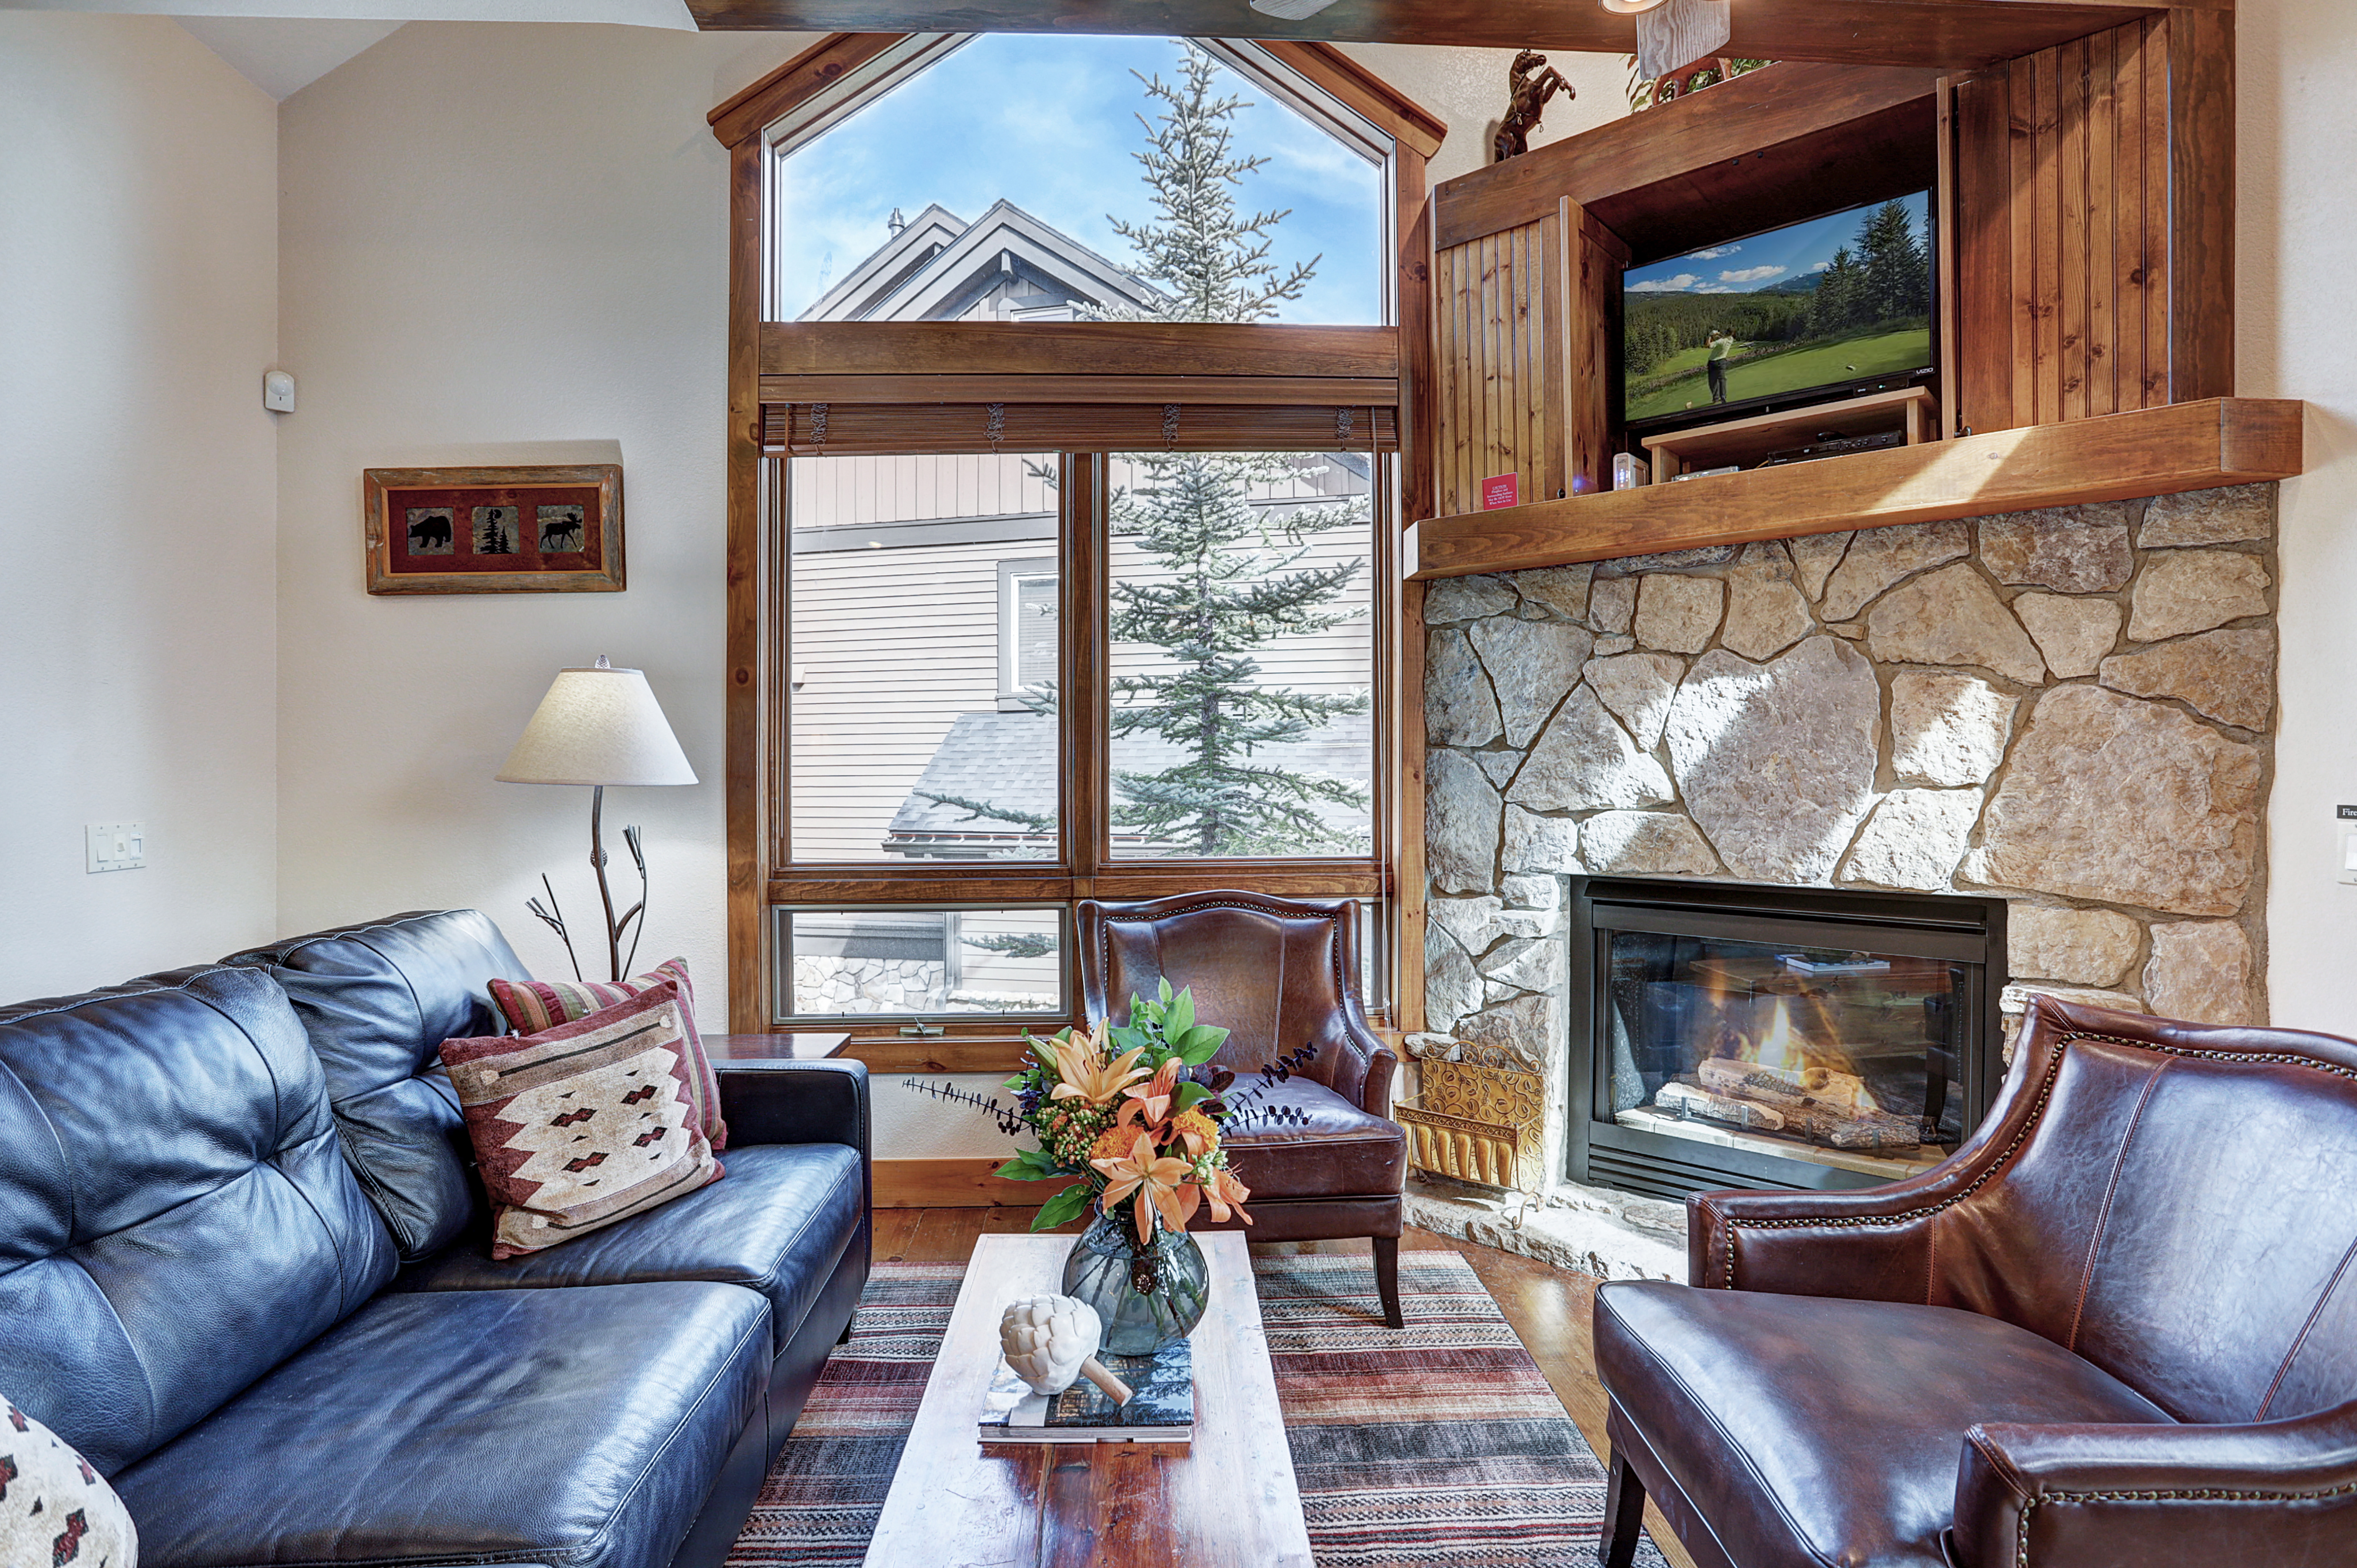 Relax with family and friends in this spacious living area - Amber Sky Breckenridge Vacation Rental